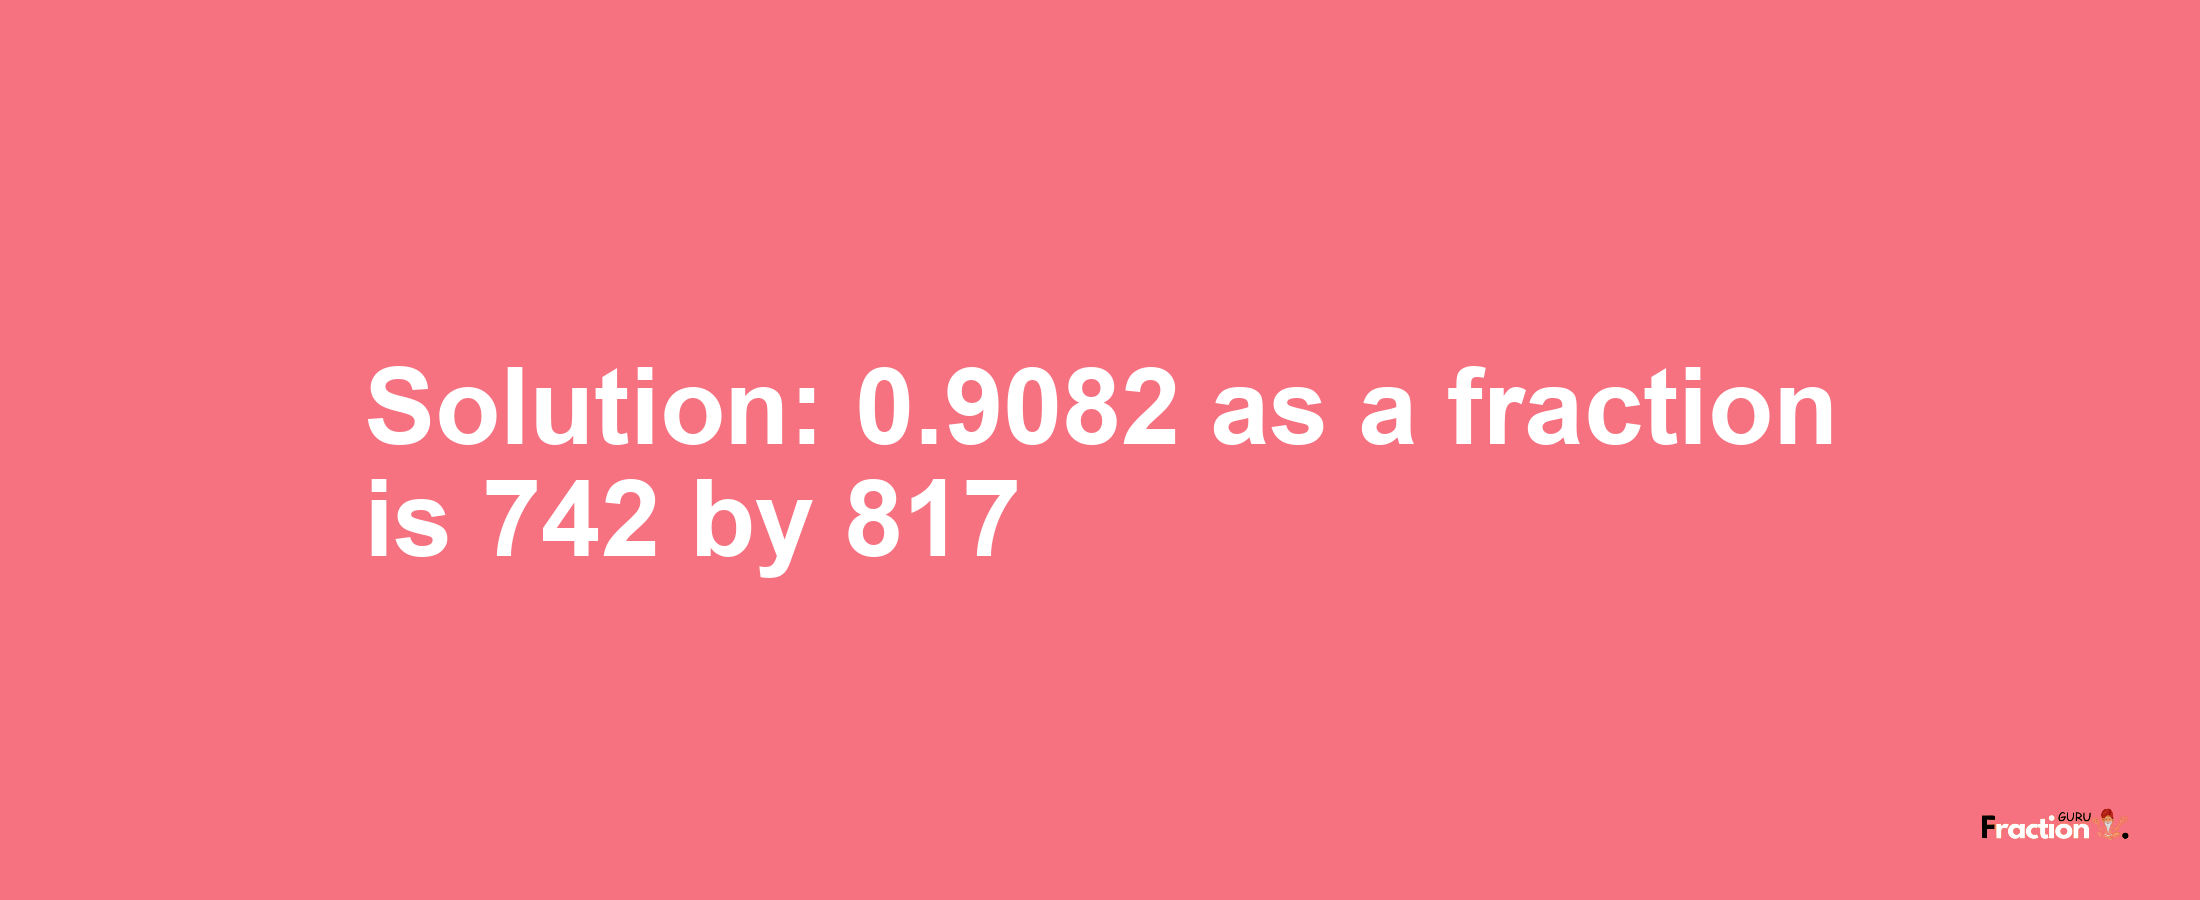 Solution:0.9082 as a fraction is 742/817